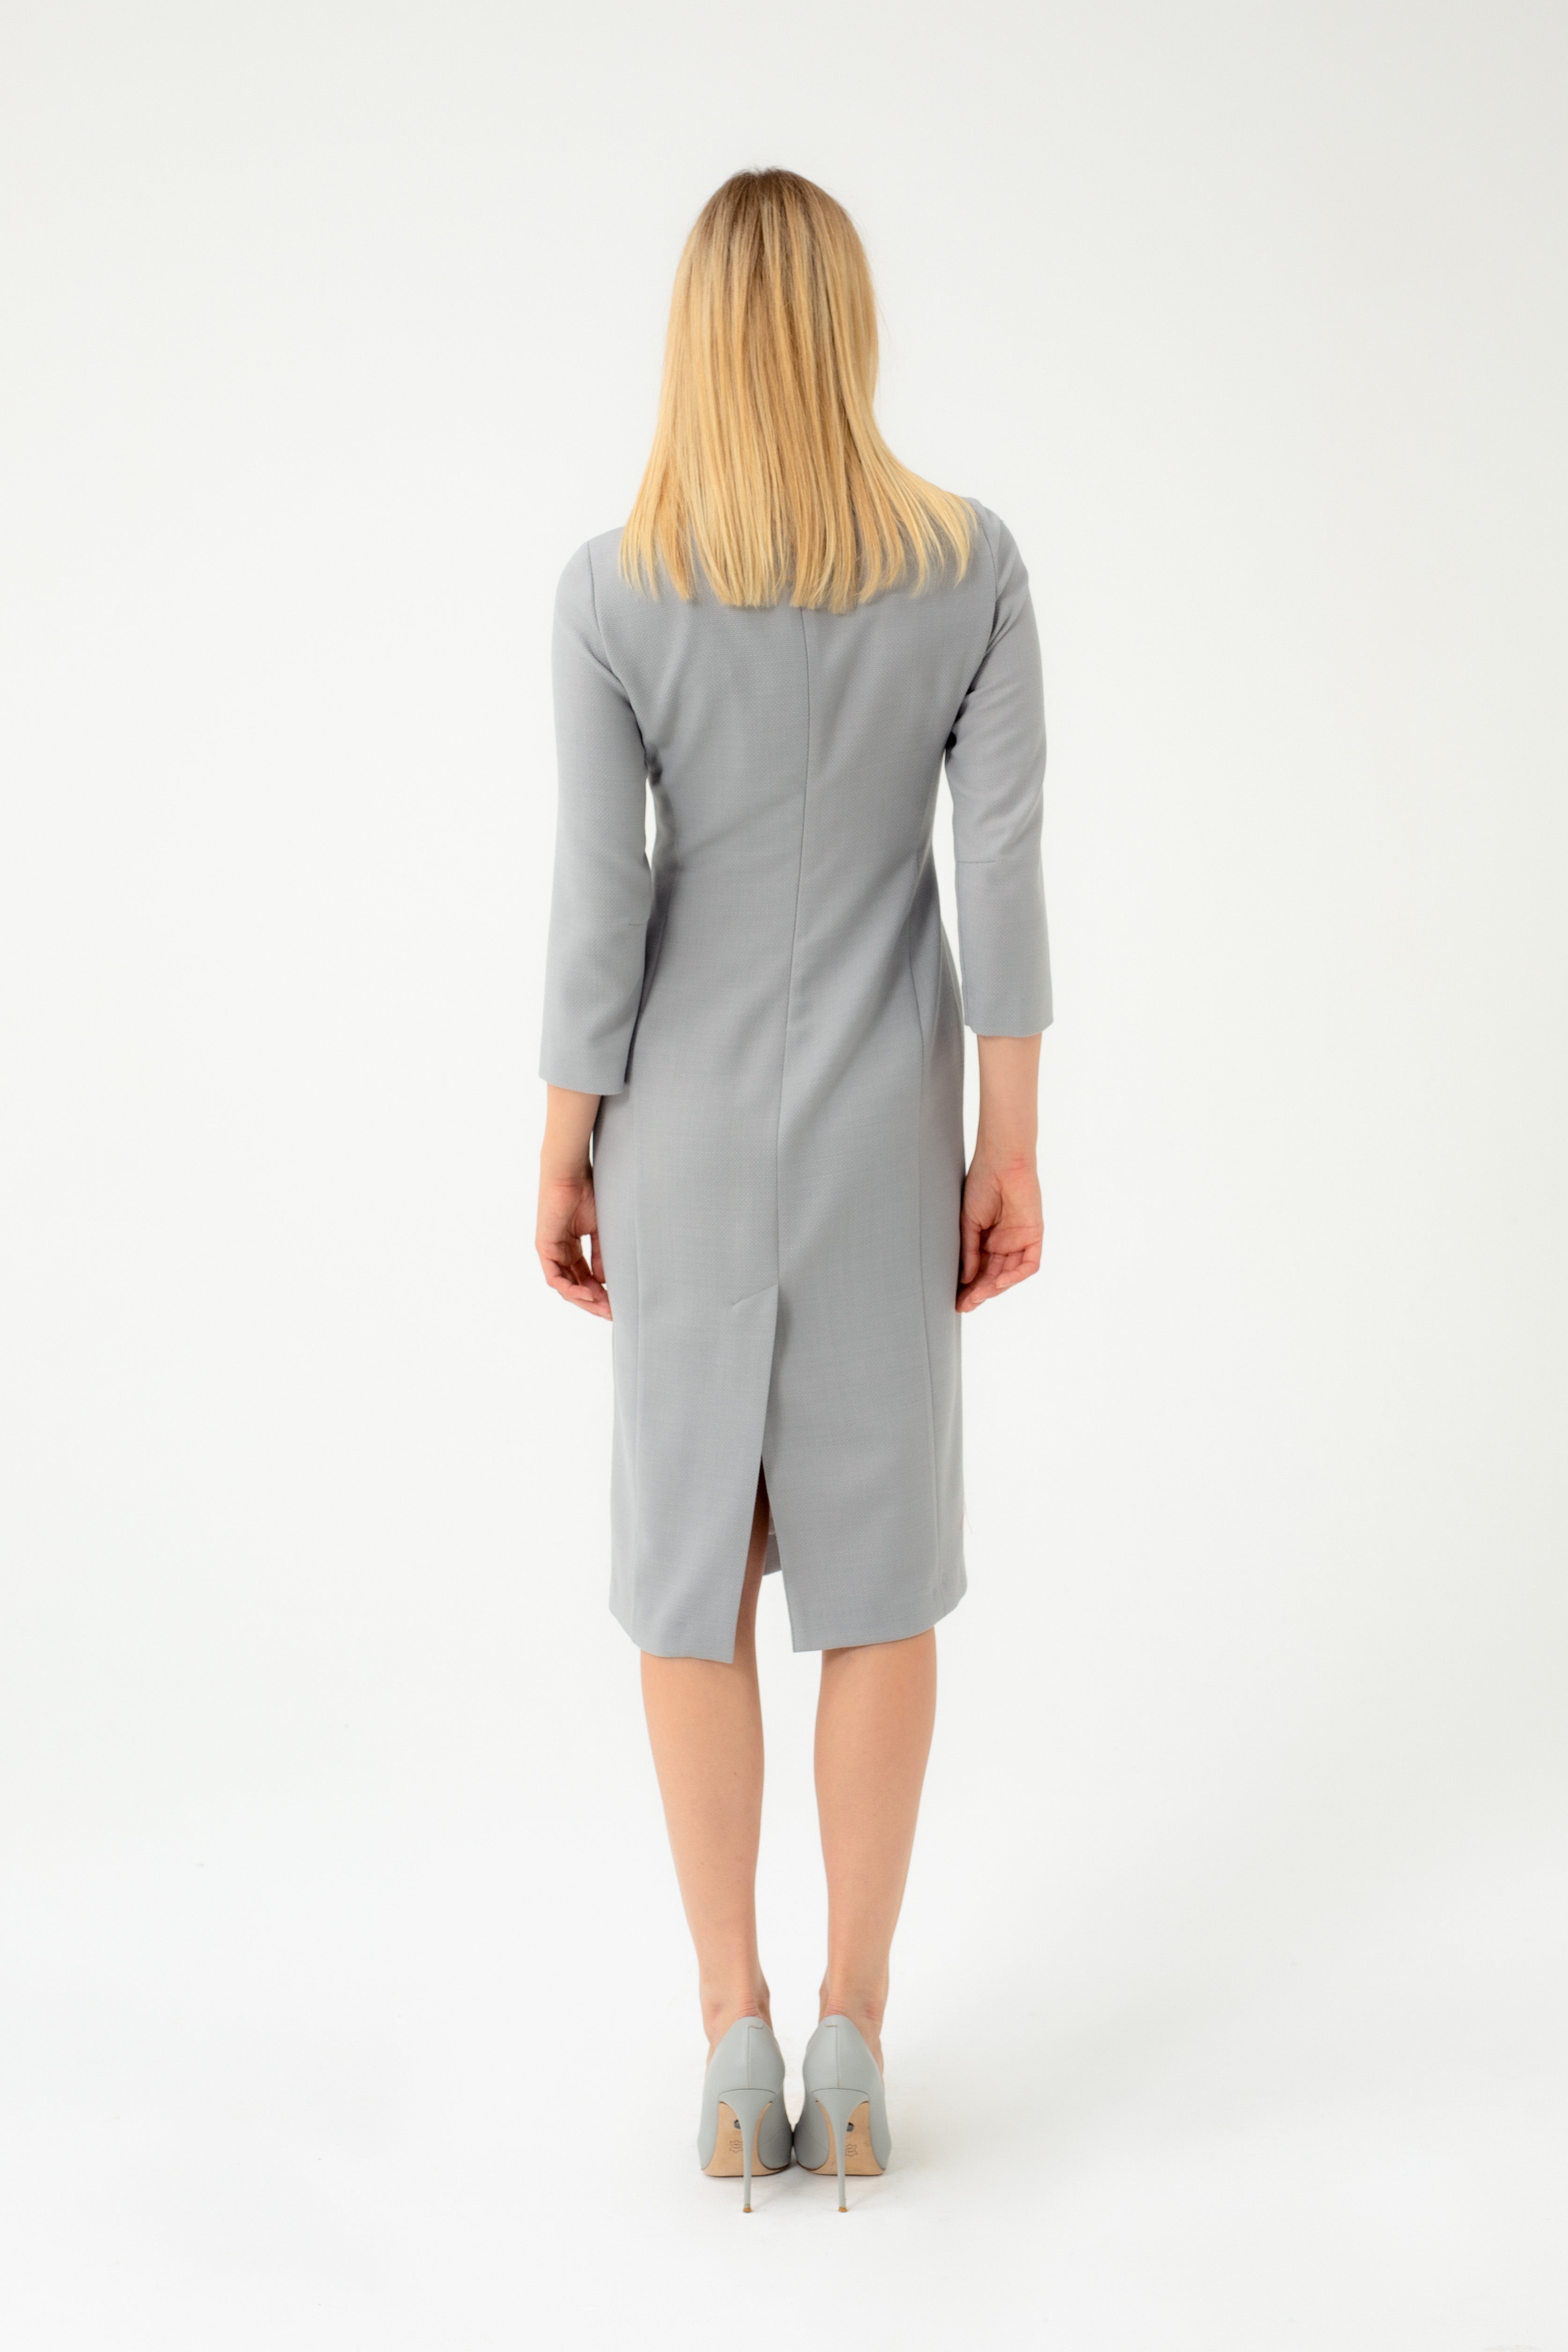 FITTED MIDI LENGTH GREY DRESS